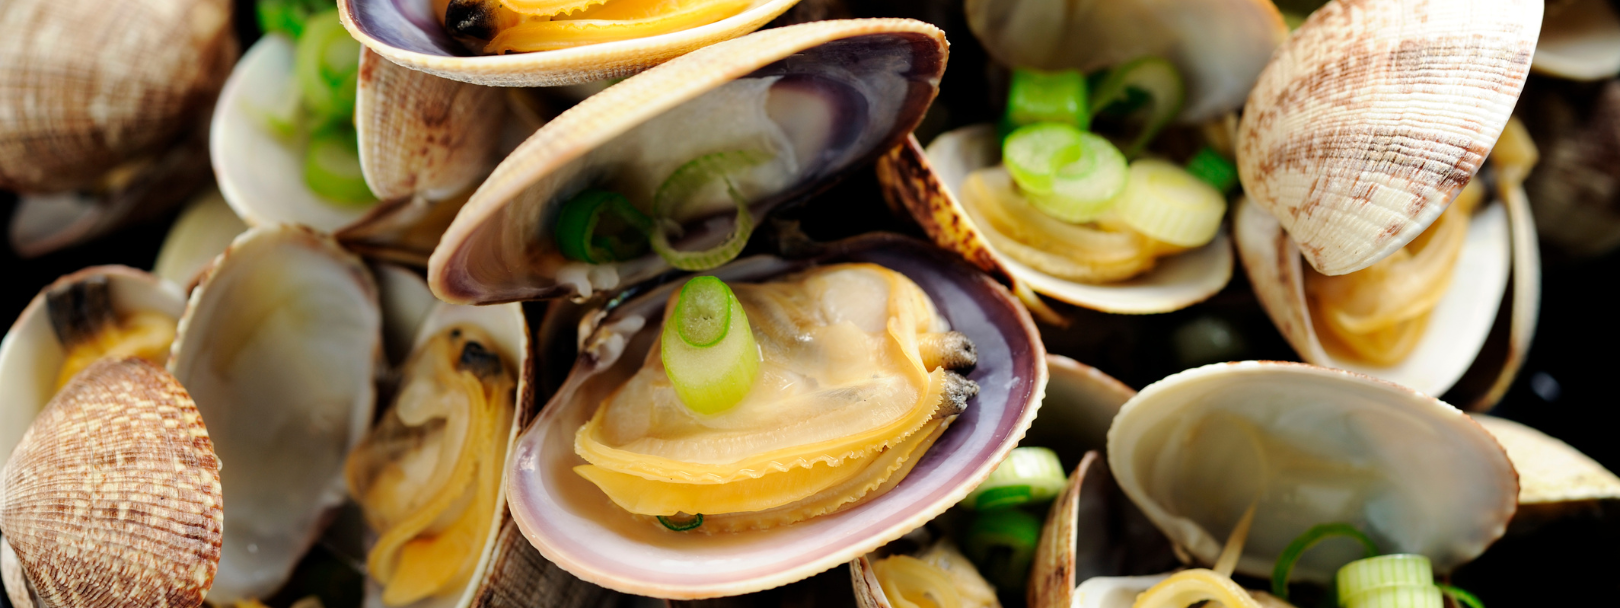 Omega-3 rich mussels